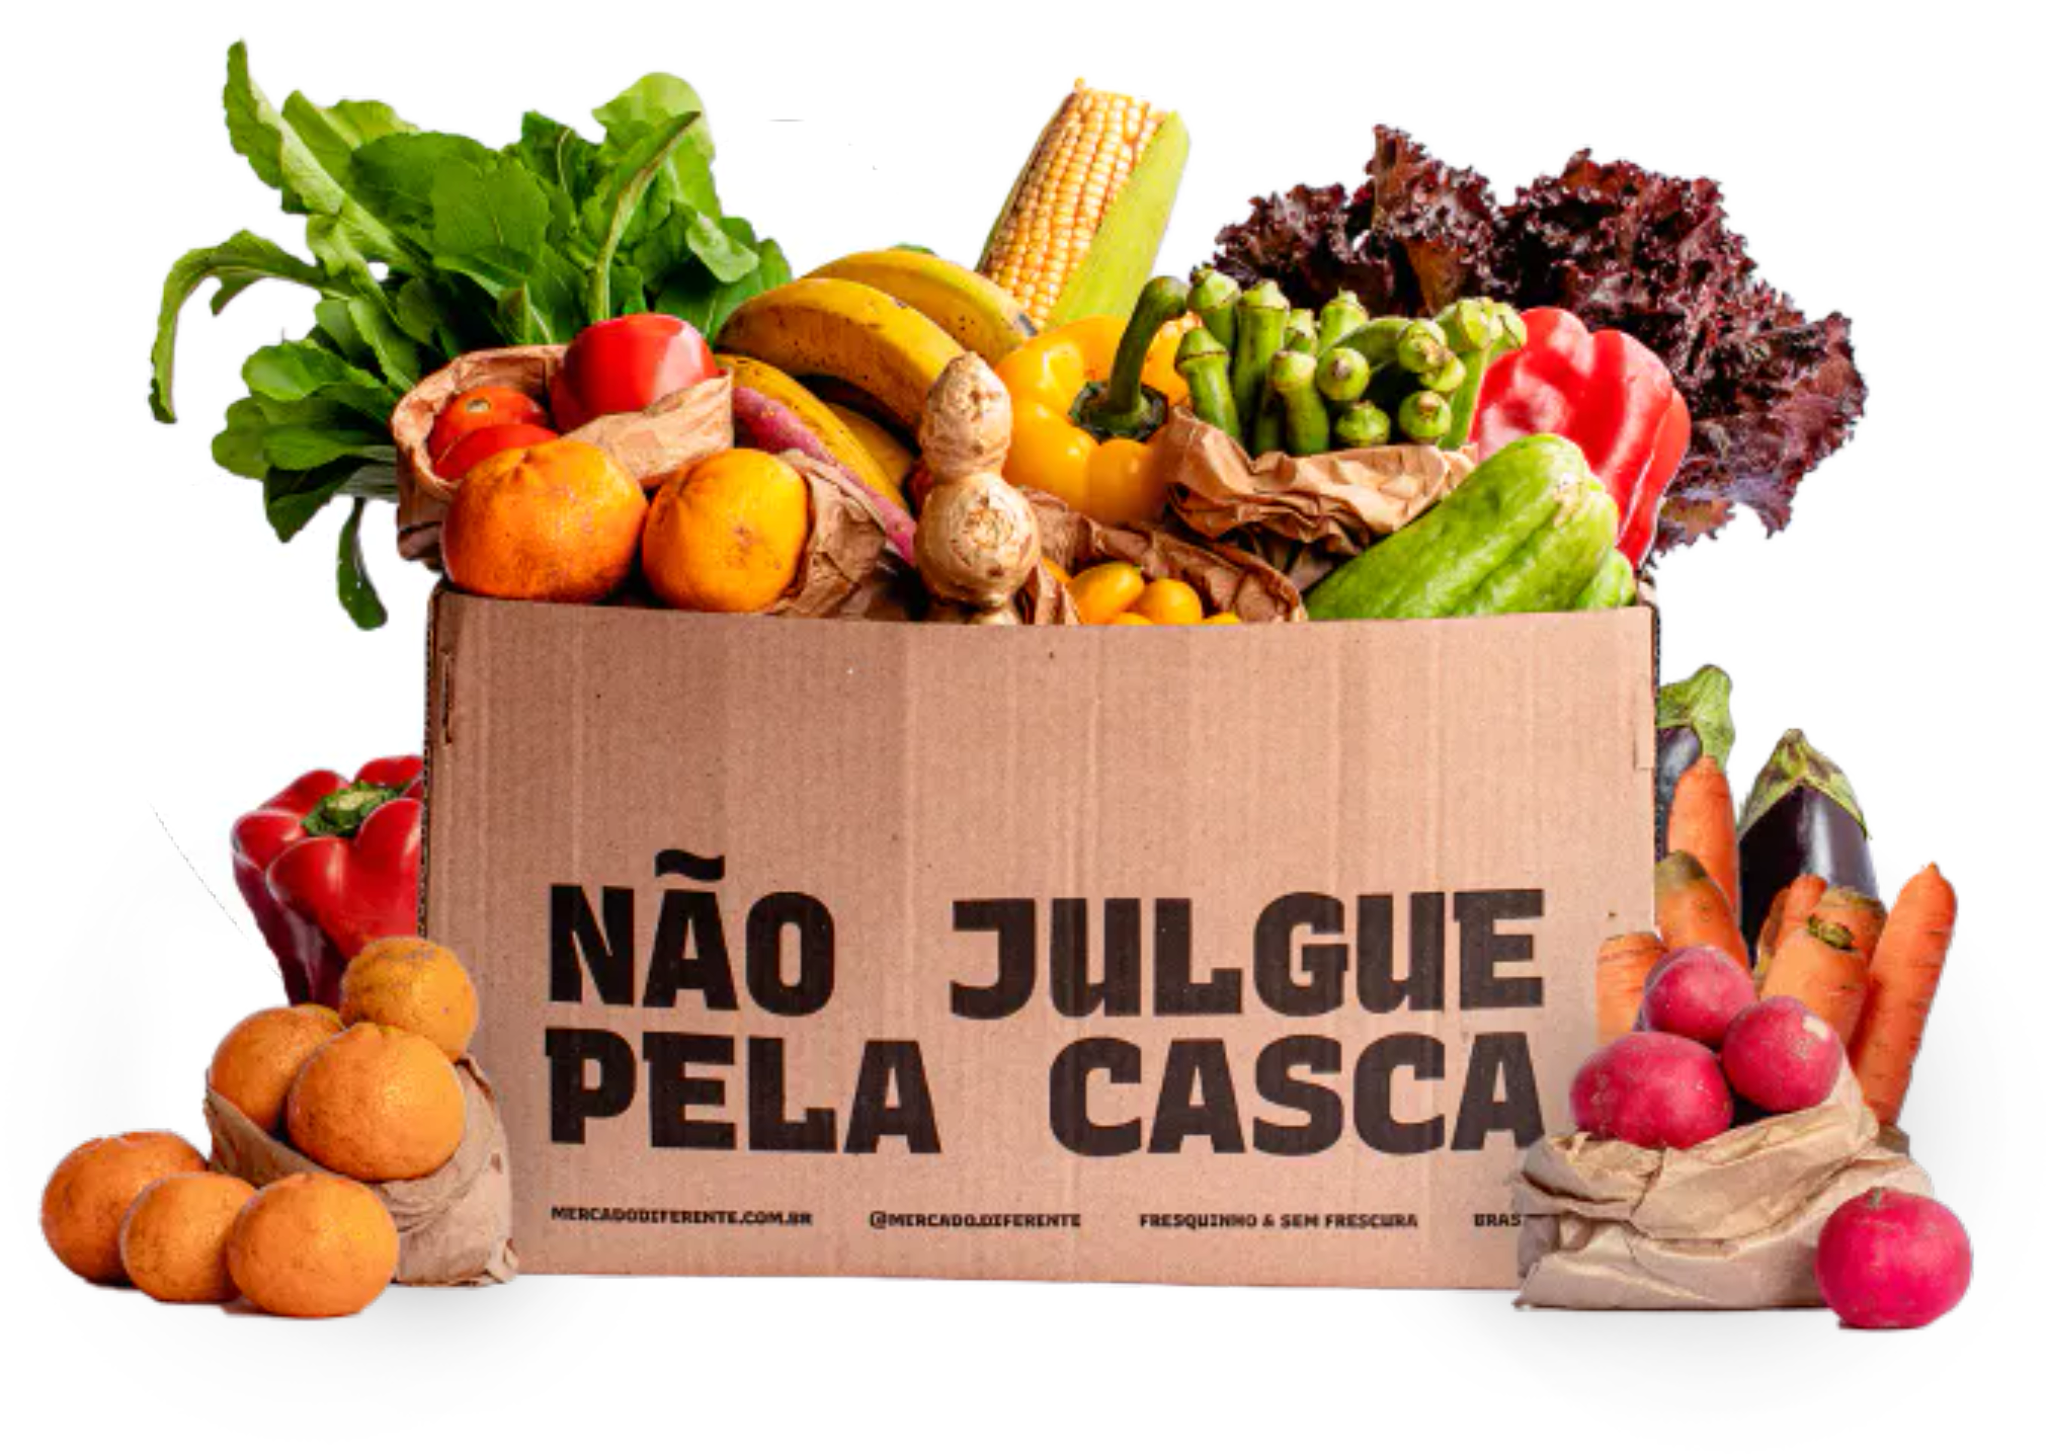 Diferente makes healthy foods more accessible in Brazil